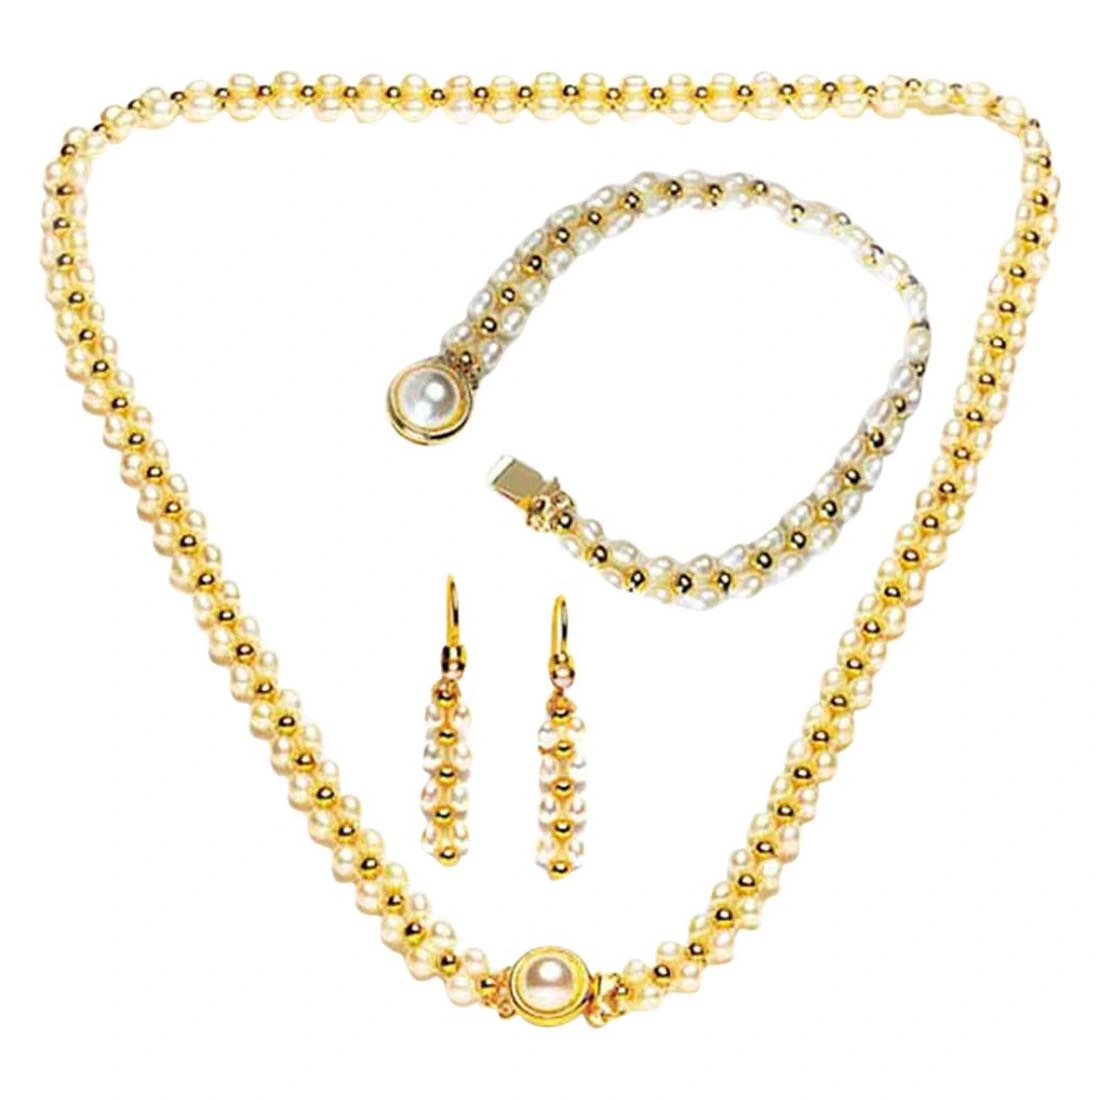 Hypnotize - Real Freshwater Pearl & Gold Plated Beads Necklace, Bracelet & Earring Set for Women (SP84)